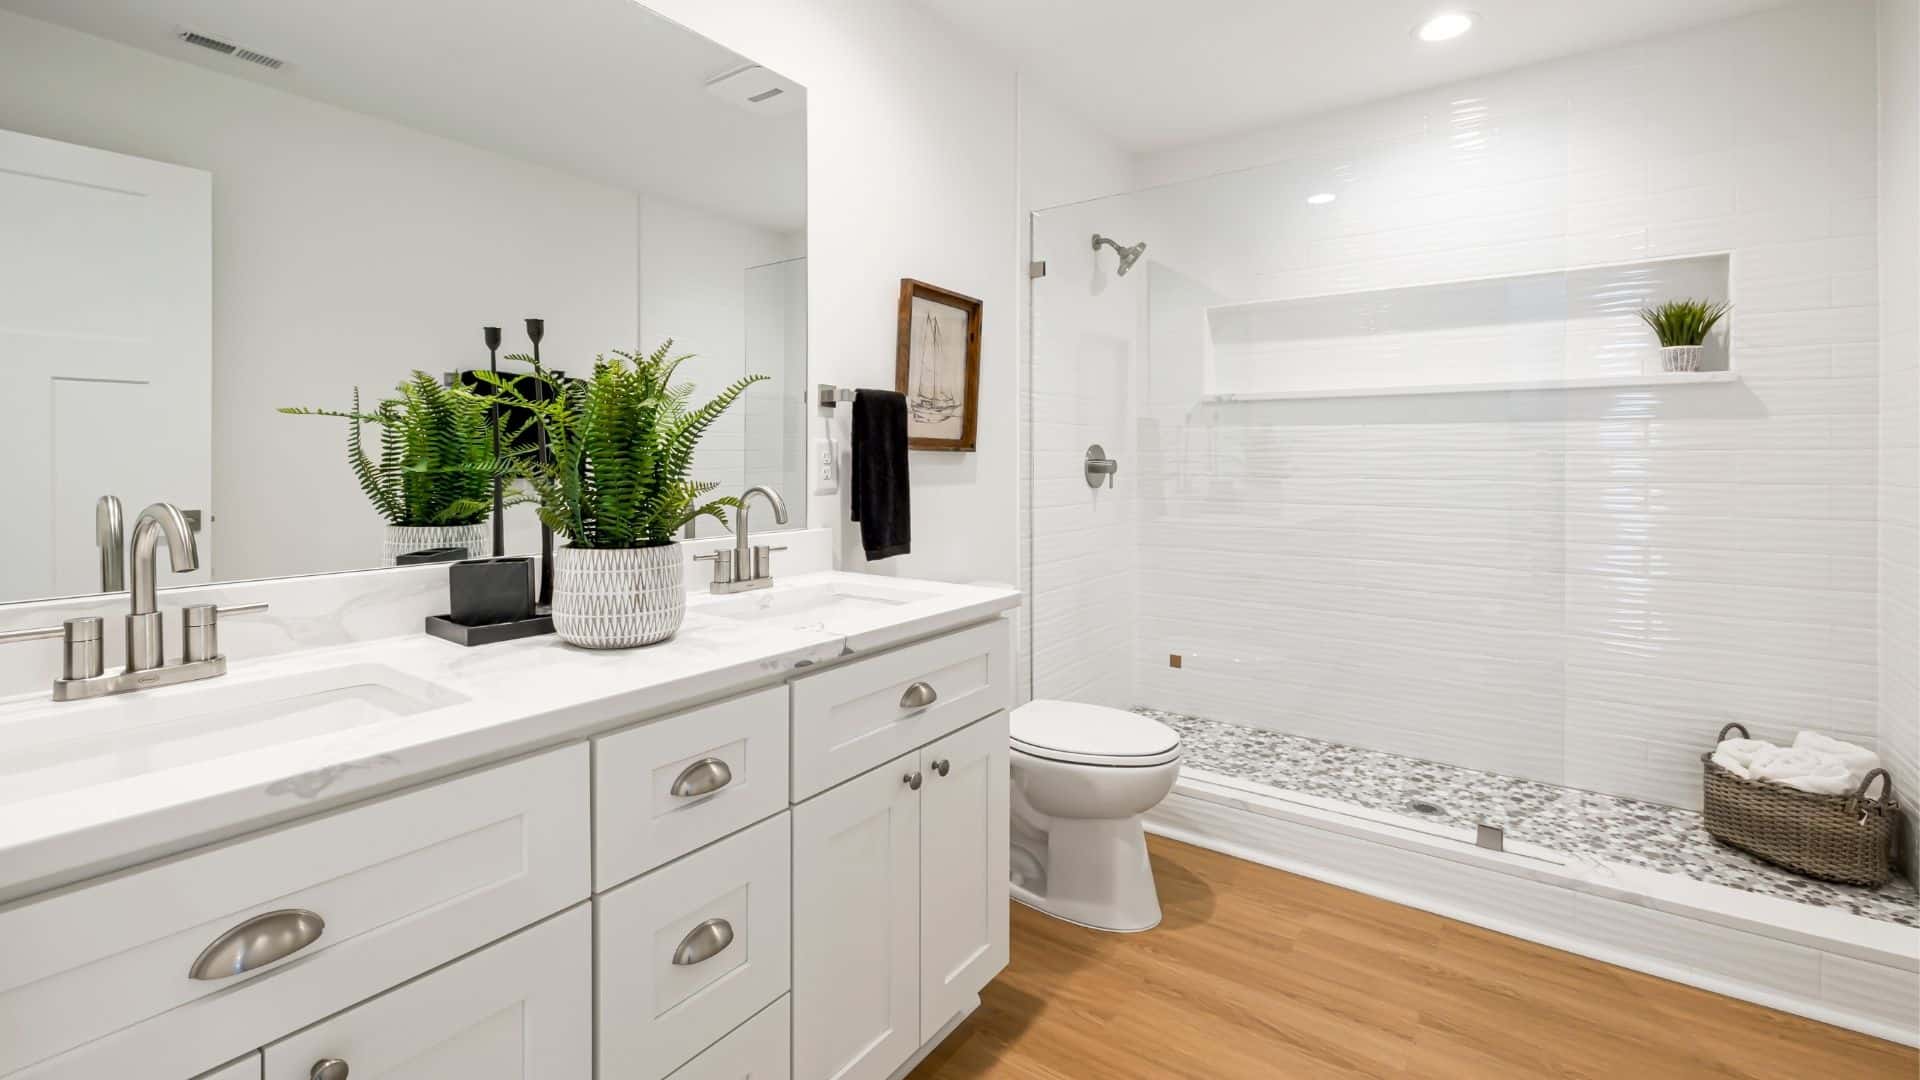 Spacious bathroom with white cabinet, toilet, and shower